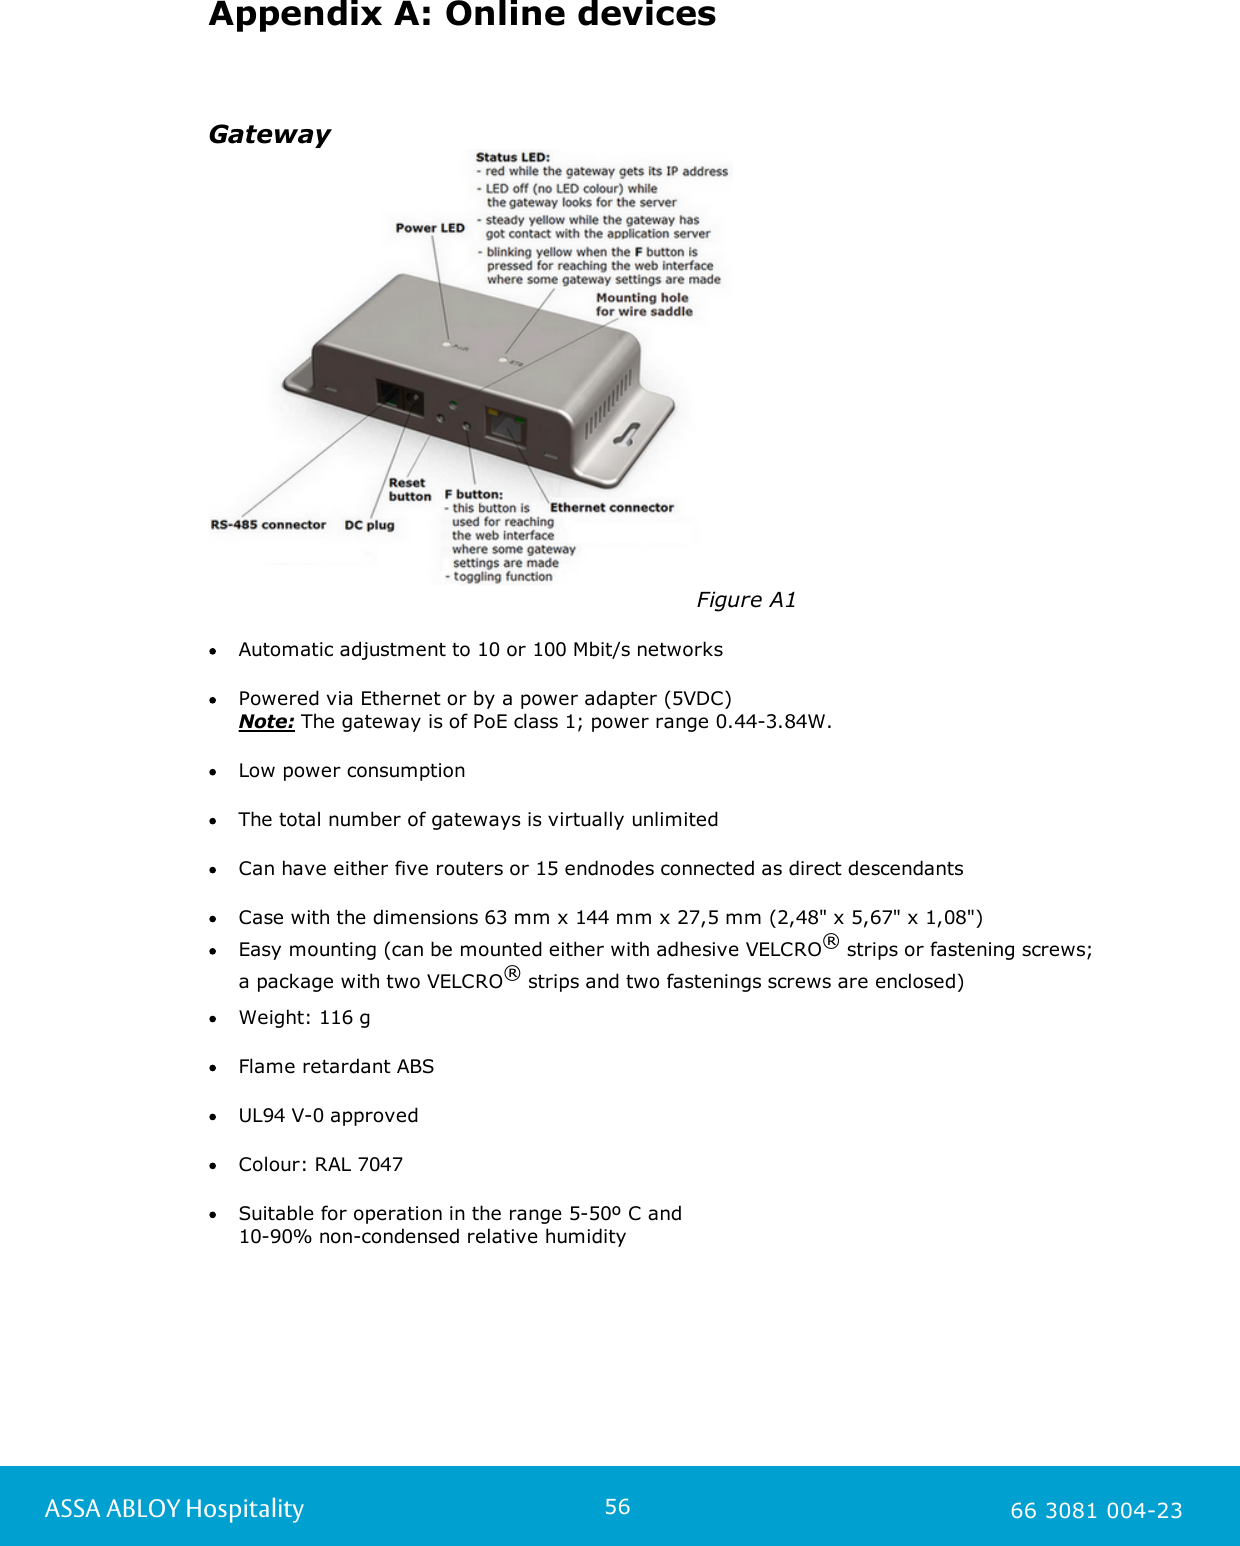 56ASSA ABLOY Hospitality 66 3081 004-23Appendix A: Online devicesGateway                                                                   Figure A1Automatic adjustment to 10 or 100 Mbit/s networksPowered via Ethernet or by a power adapter (5VDC) Note: The gateway is of PoE class 1; power range 0.44-3.84W. Low power consumptionThe total number of gateways is virtually unlimited Can have either five routers or 15 endnodes connected as direct descendantsCase with the dimensions 63 mm x 144 mm x 27,5 mm (2,48&quot; x 5,67&quot; x 1,08&quot;)Easy mounting (can be mounted either with adhesive VELCRO® strips or fastening screws; a package with two VELCRO® strips and two fastenings screws are enclosed)    Weight: 116 gFlame retardant ABSUL94 V-0 approvedColour: RAL 7047Suitable for operation in the range 5-50º C and 10-90% non-condensed relative humidity